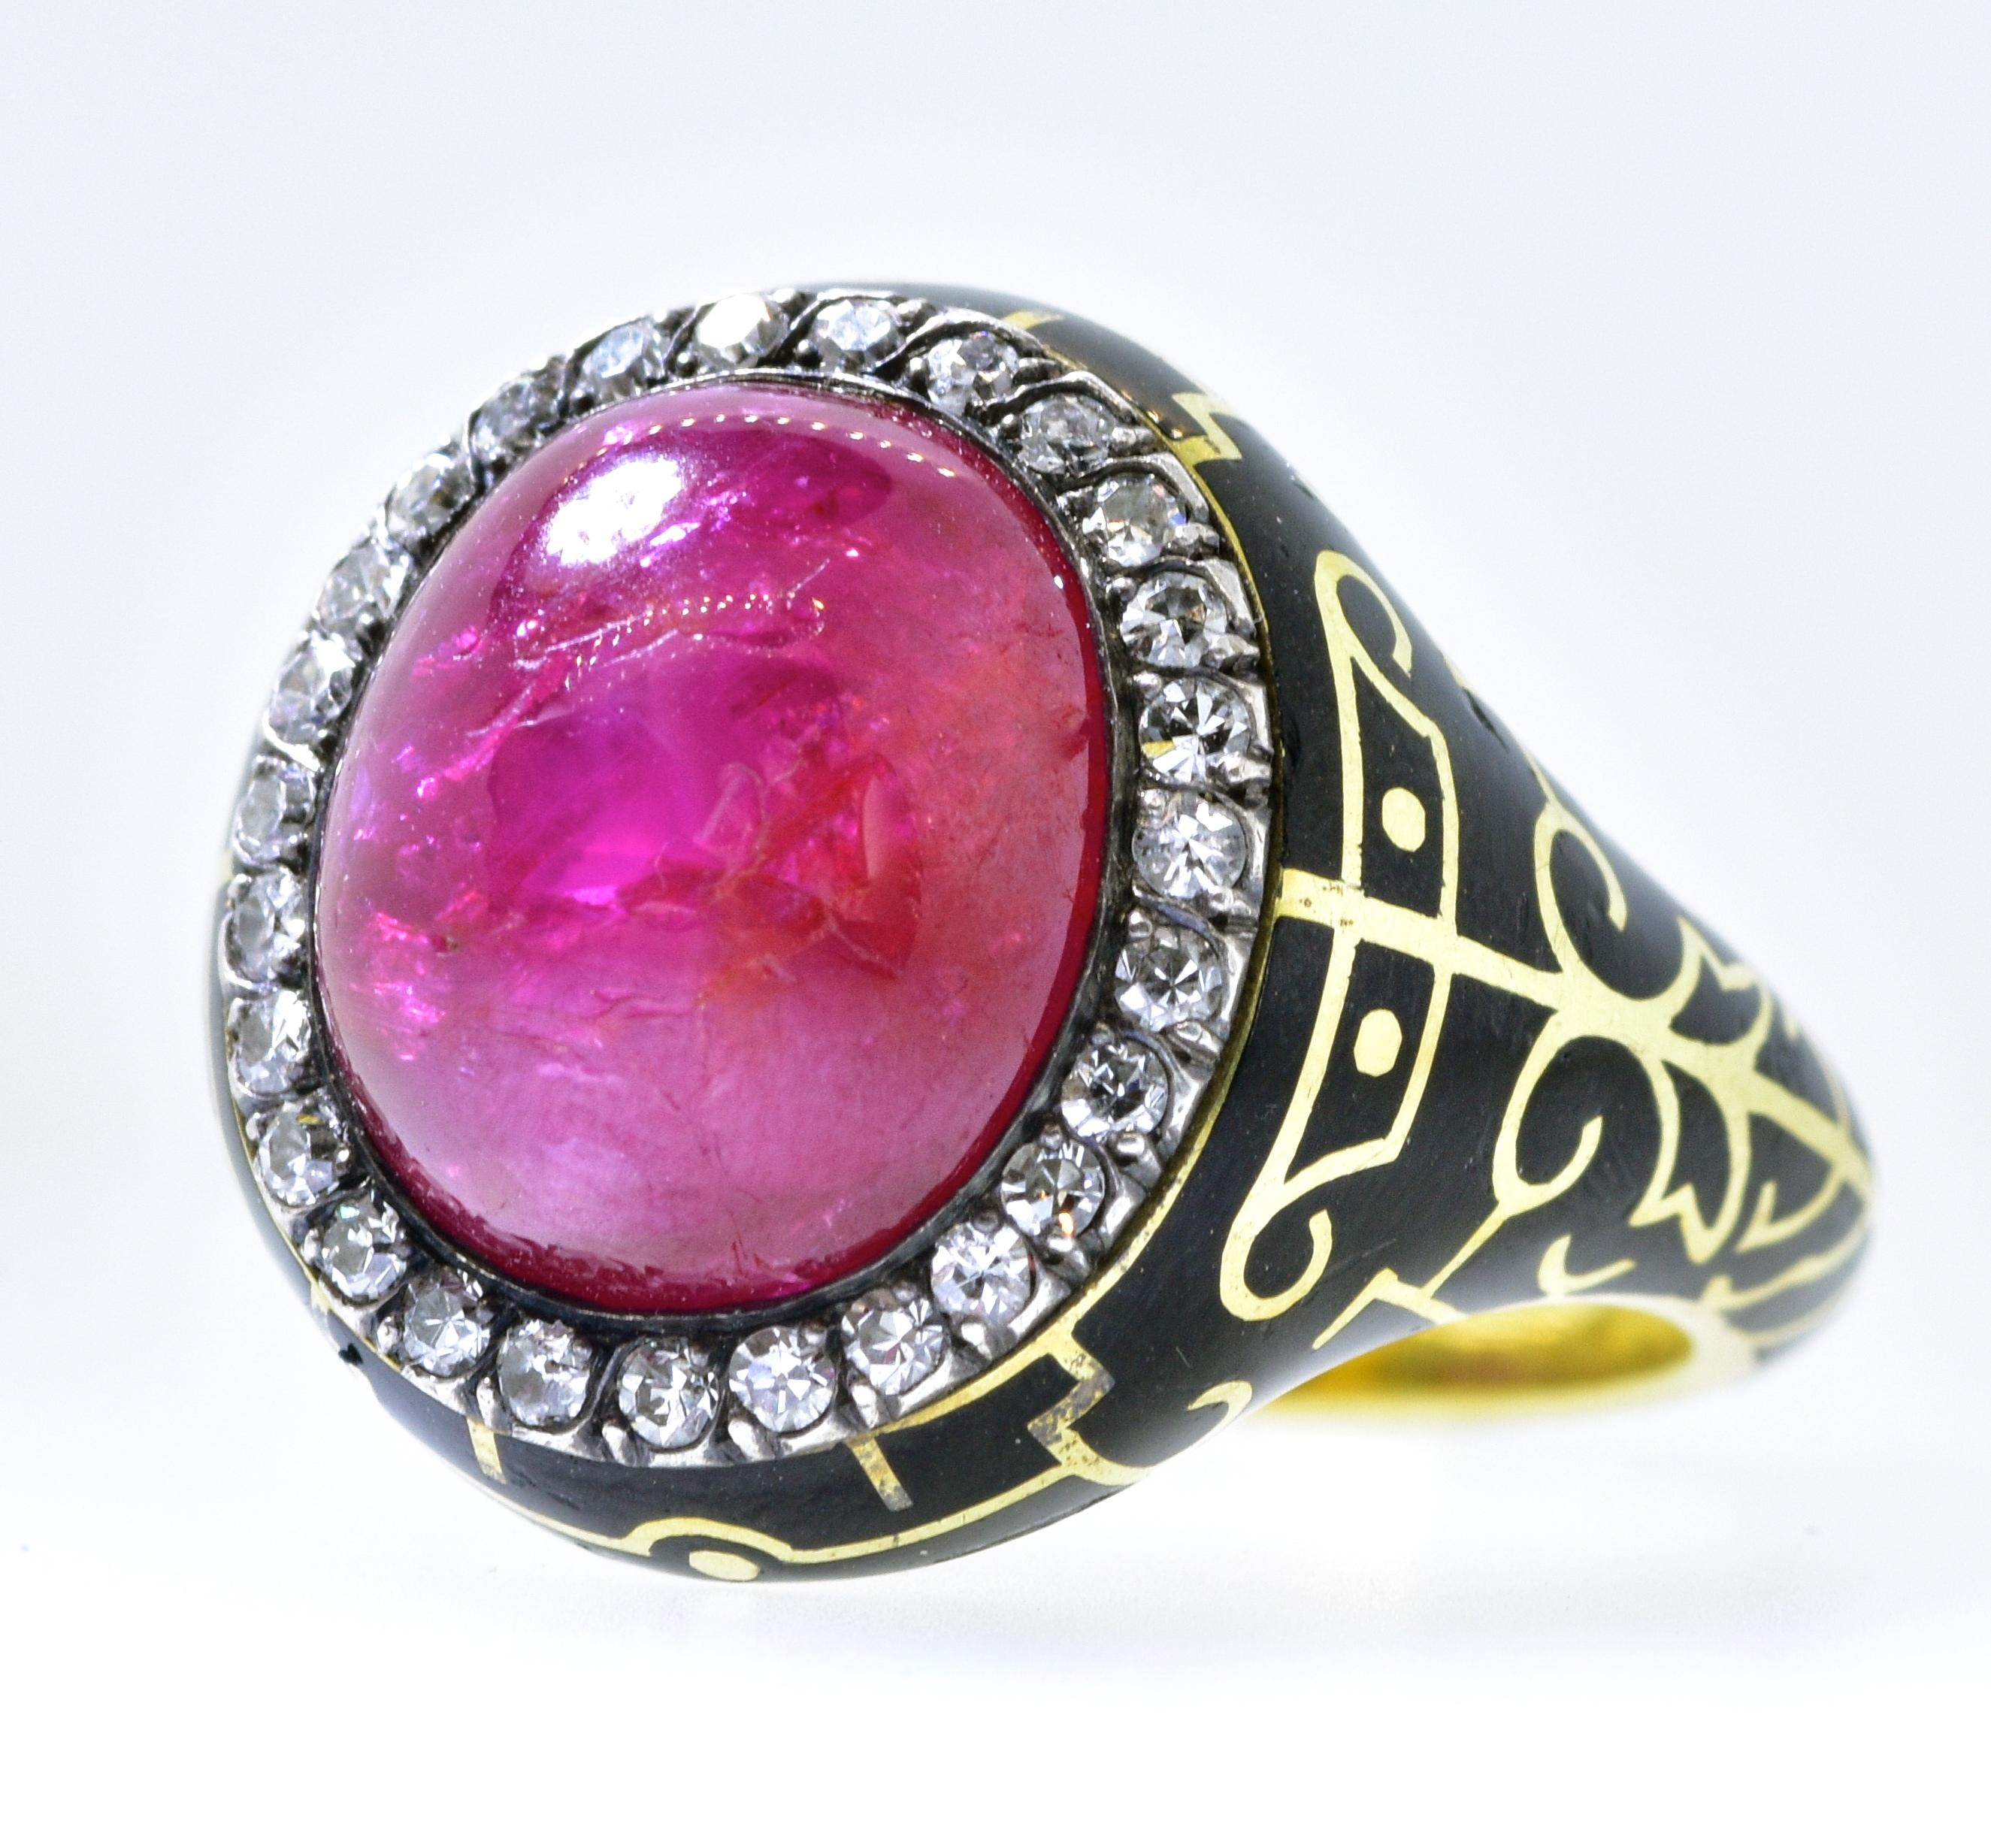 Burma Ruby, natural, untreated and unheated and accompanied with a certificate from The American Gemological Laboratories, this Burma ruby weighs approximately 8.5 cts.  This ring is antique, late 19th century, in gold and silver and unusual with